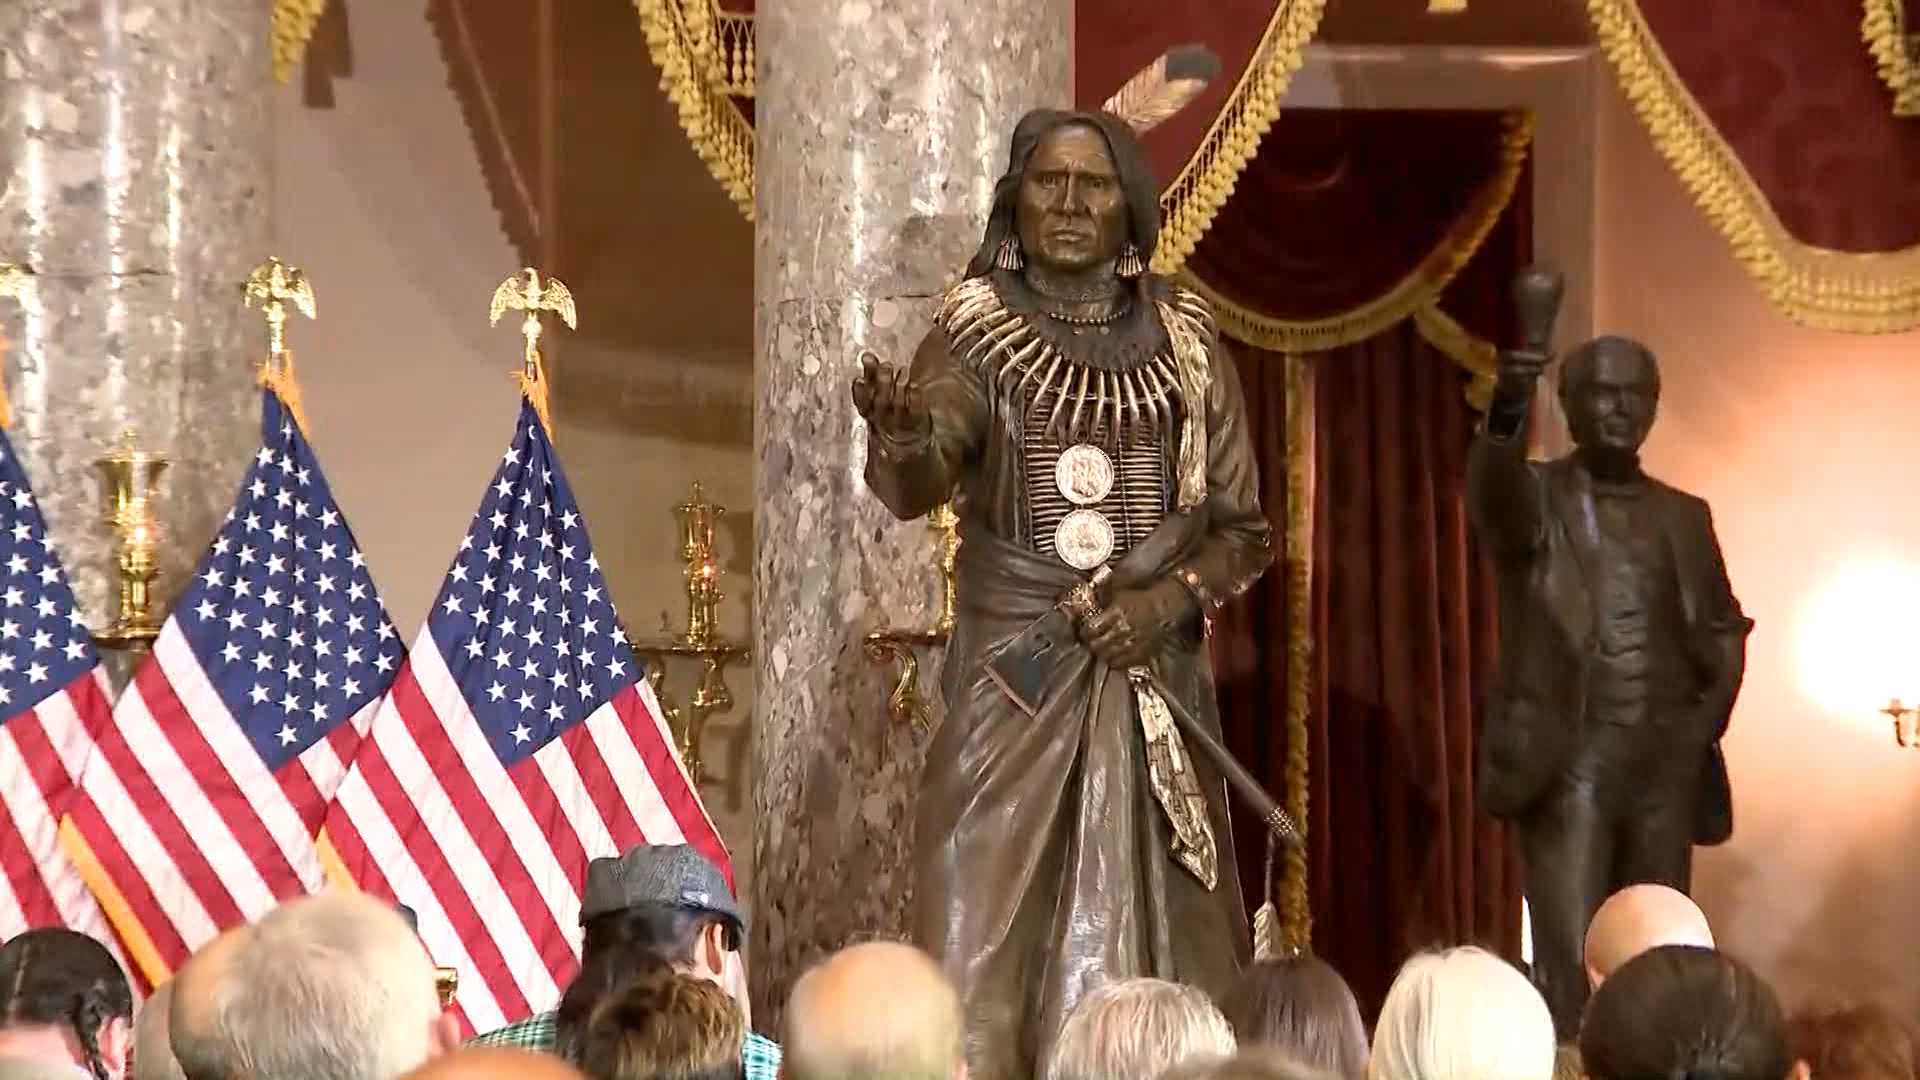 Chief Standing Bear sculpture to be unveiled at U.S. Capitol, Announce